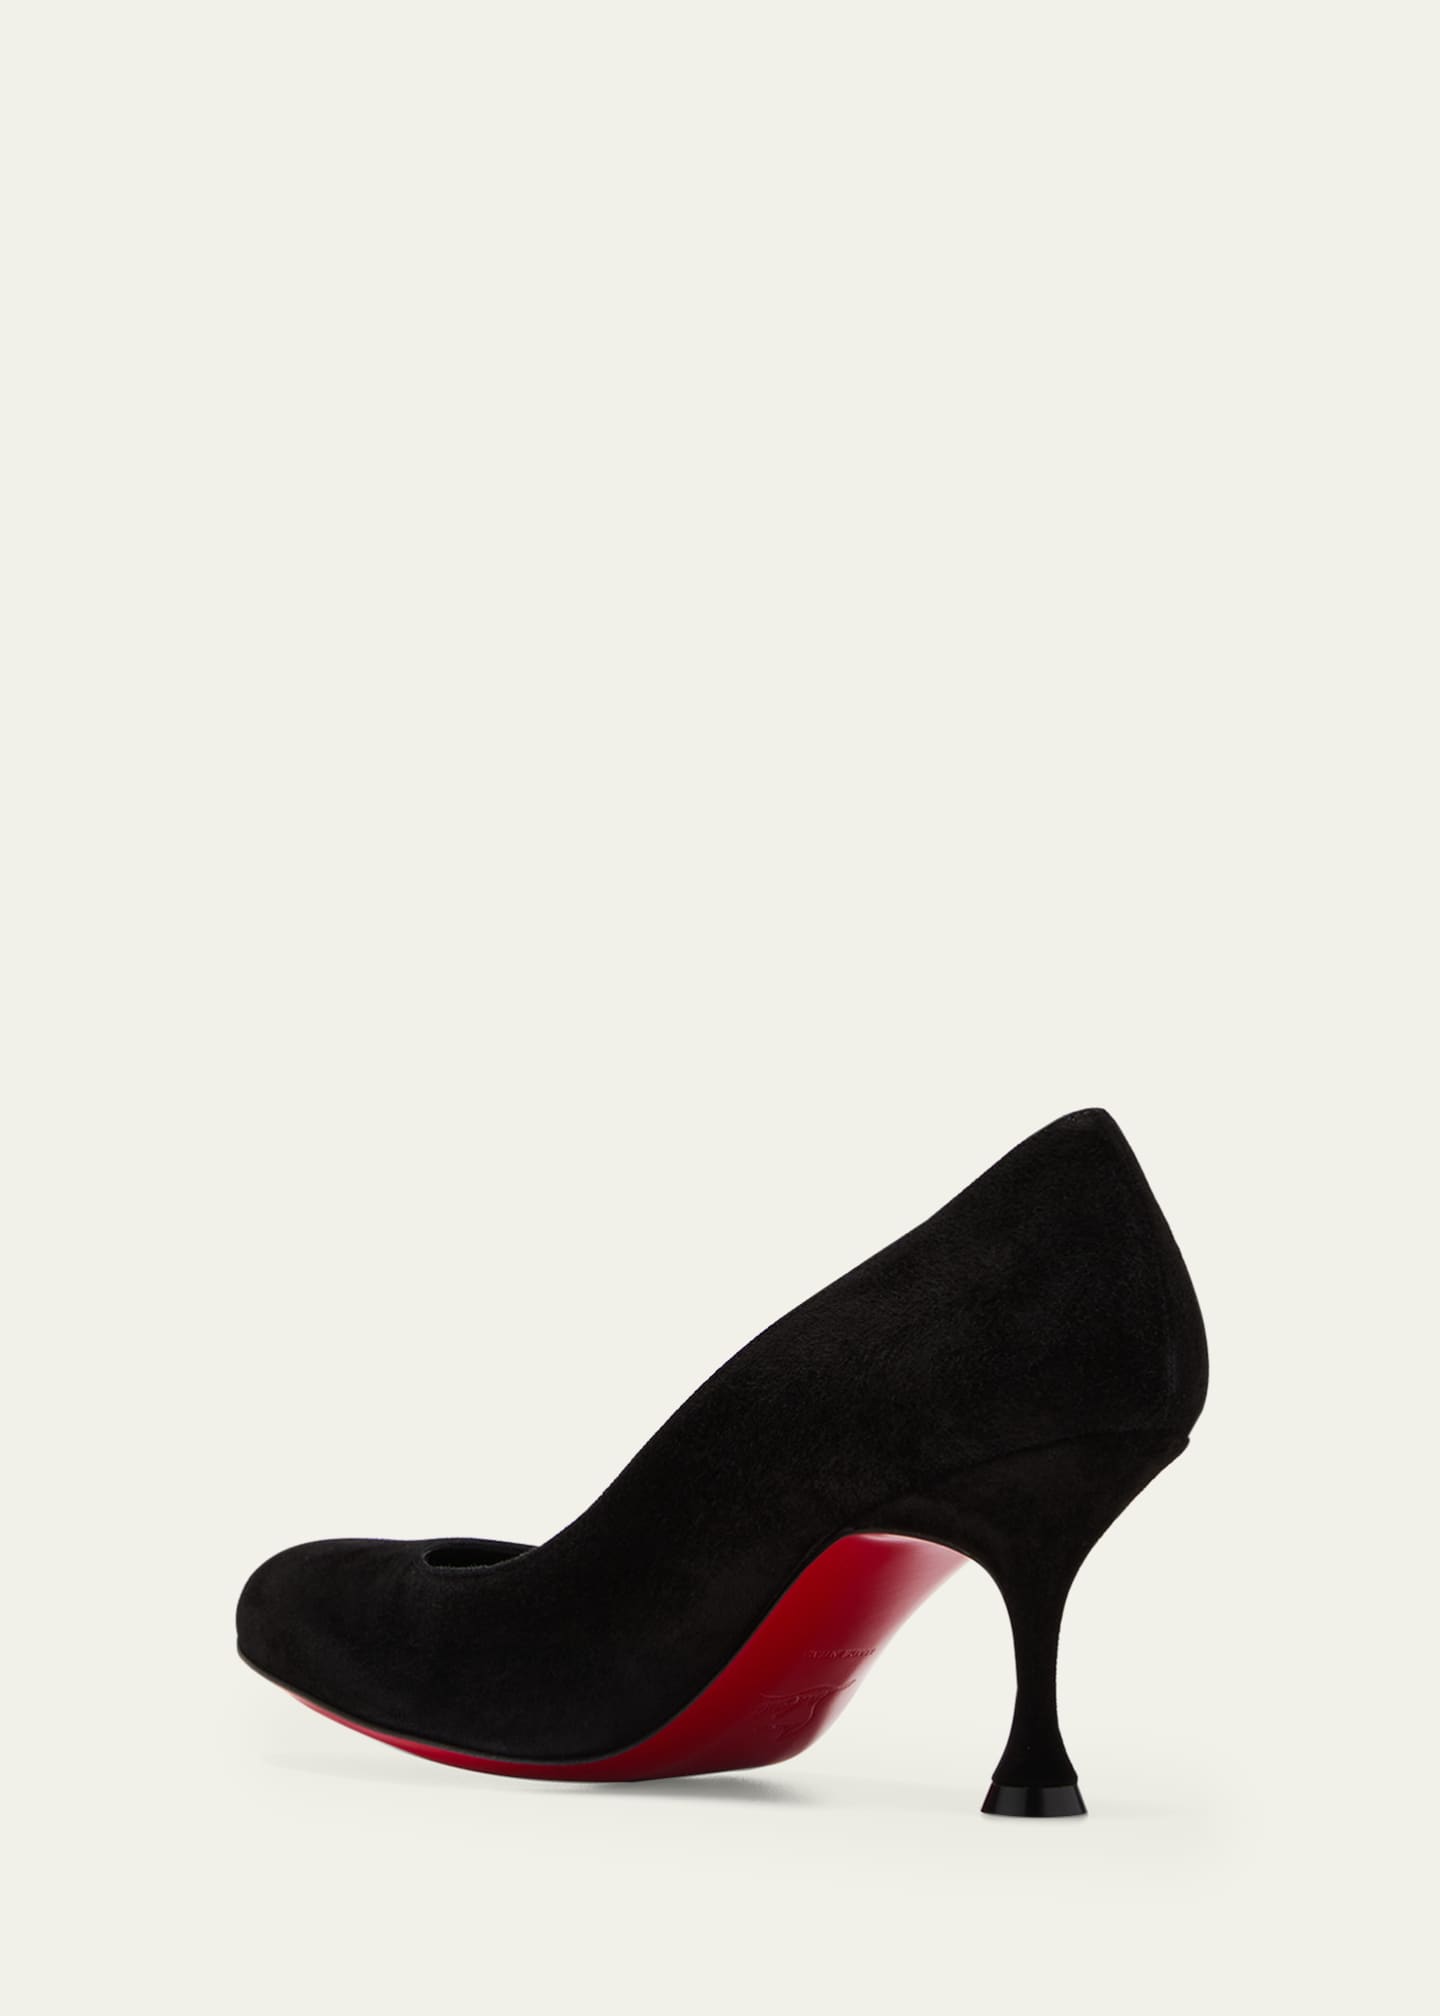 Red Bottom Pumps For Cheap